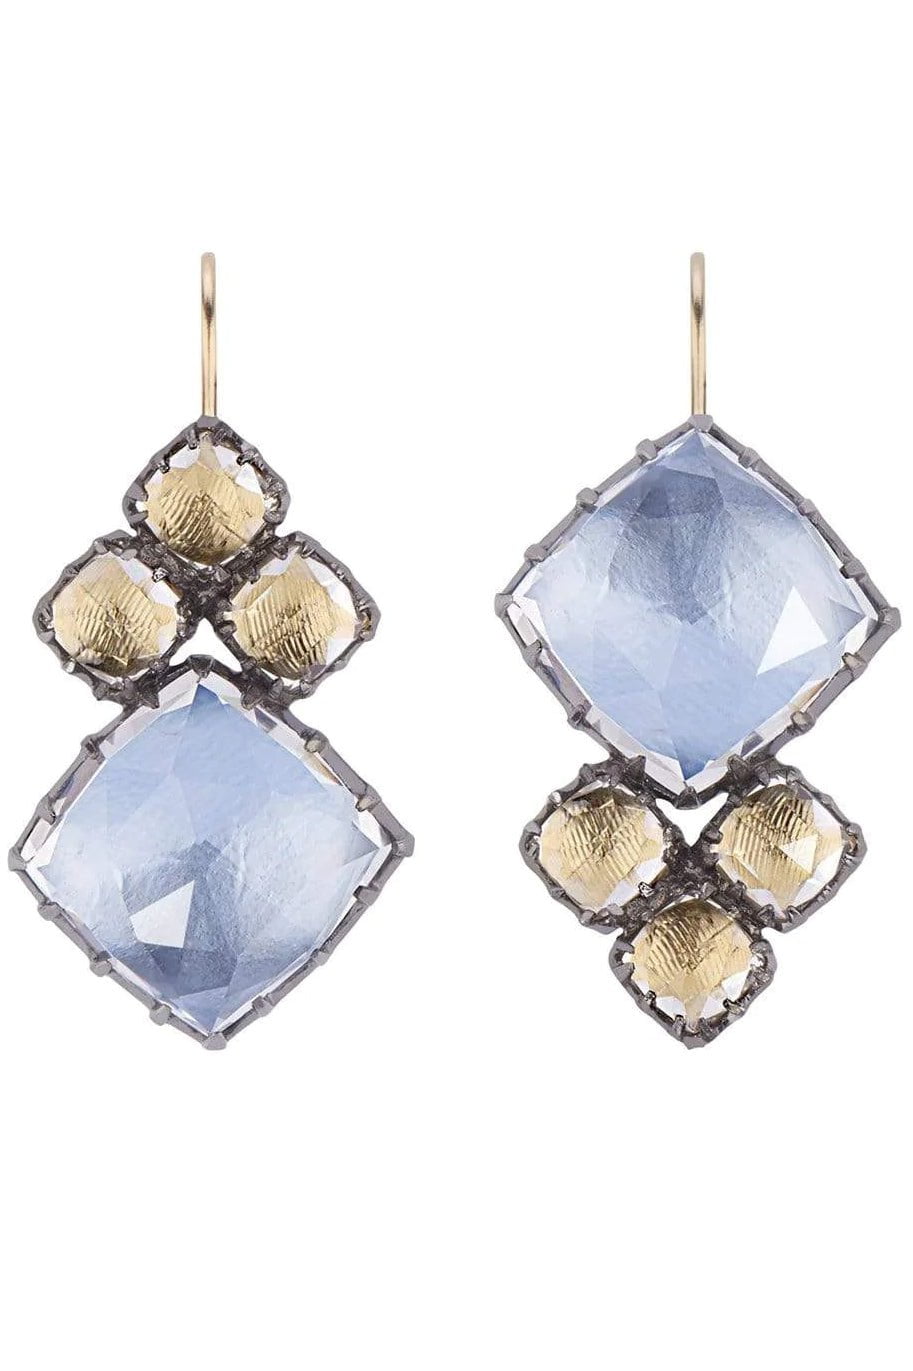 LARKSPUR & HAWK-White Quartz Blue and Yellow Sadie Cluster Earrings-SILVER